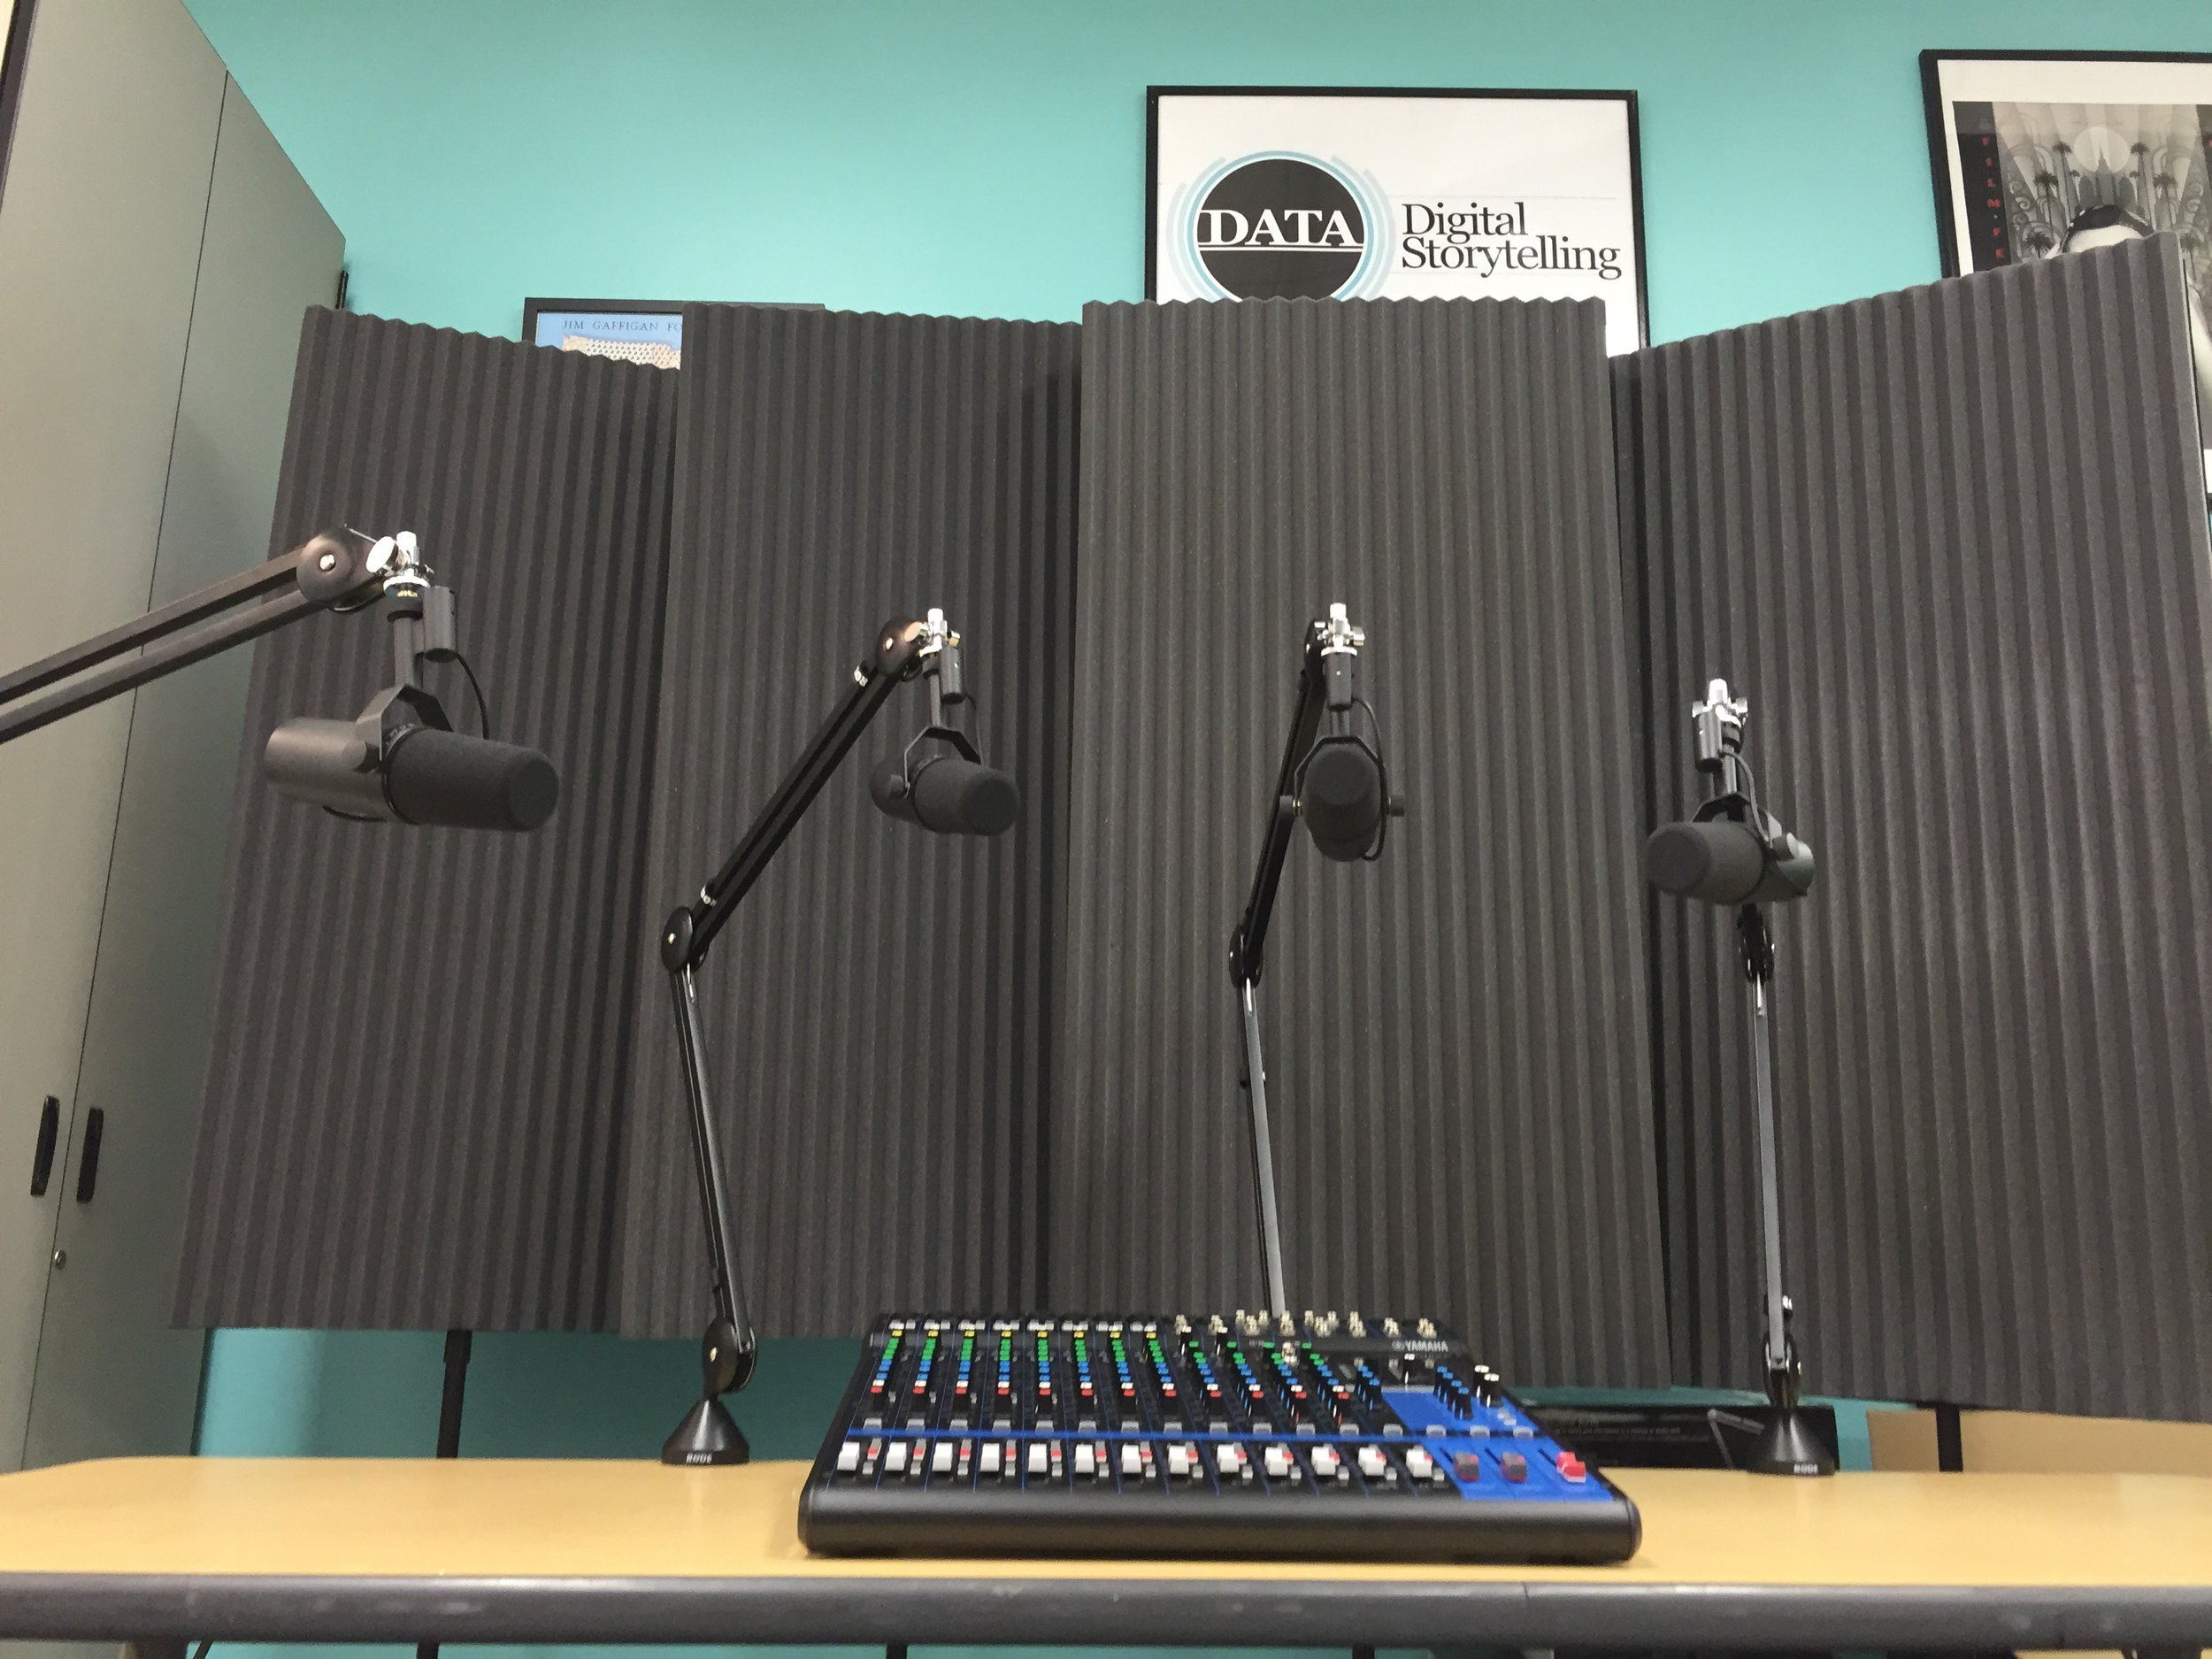  My students also helped produce a podcast for our school district, and after it became successful we were given a grant to upgrade our audio gear. This is where I used the Shure SM7B for the first time.  